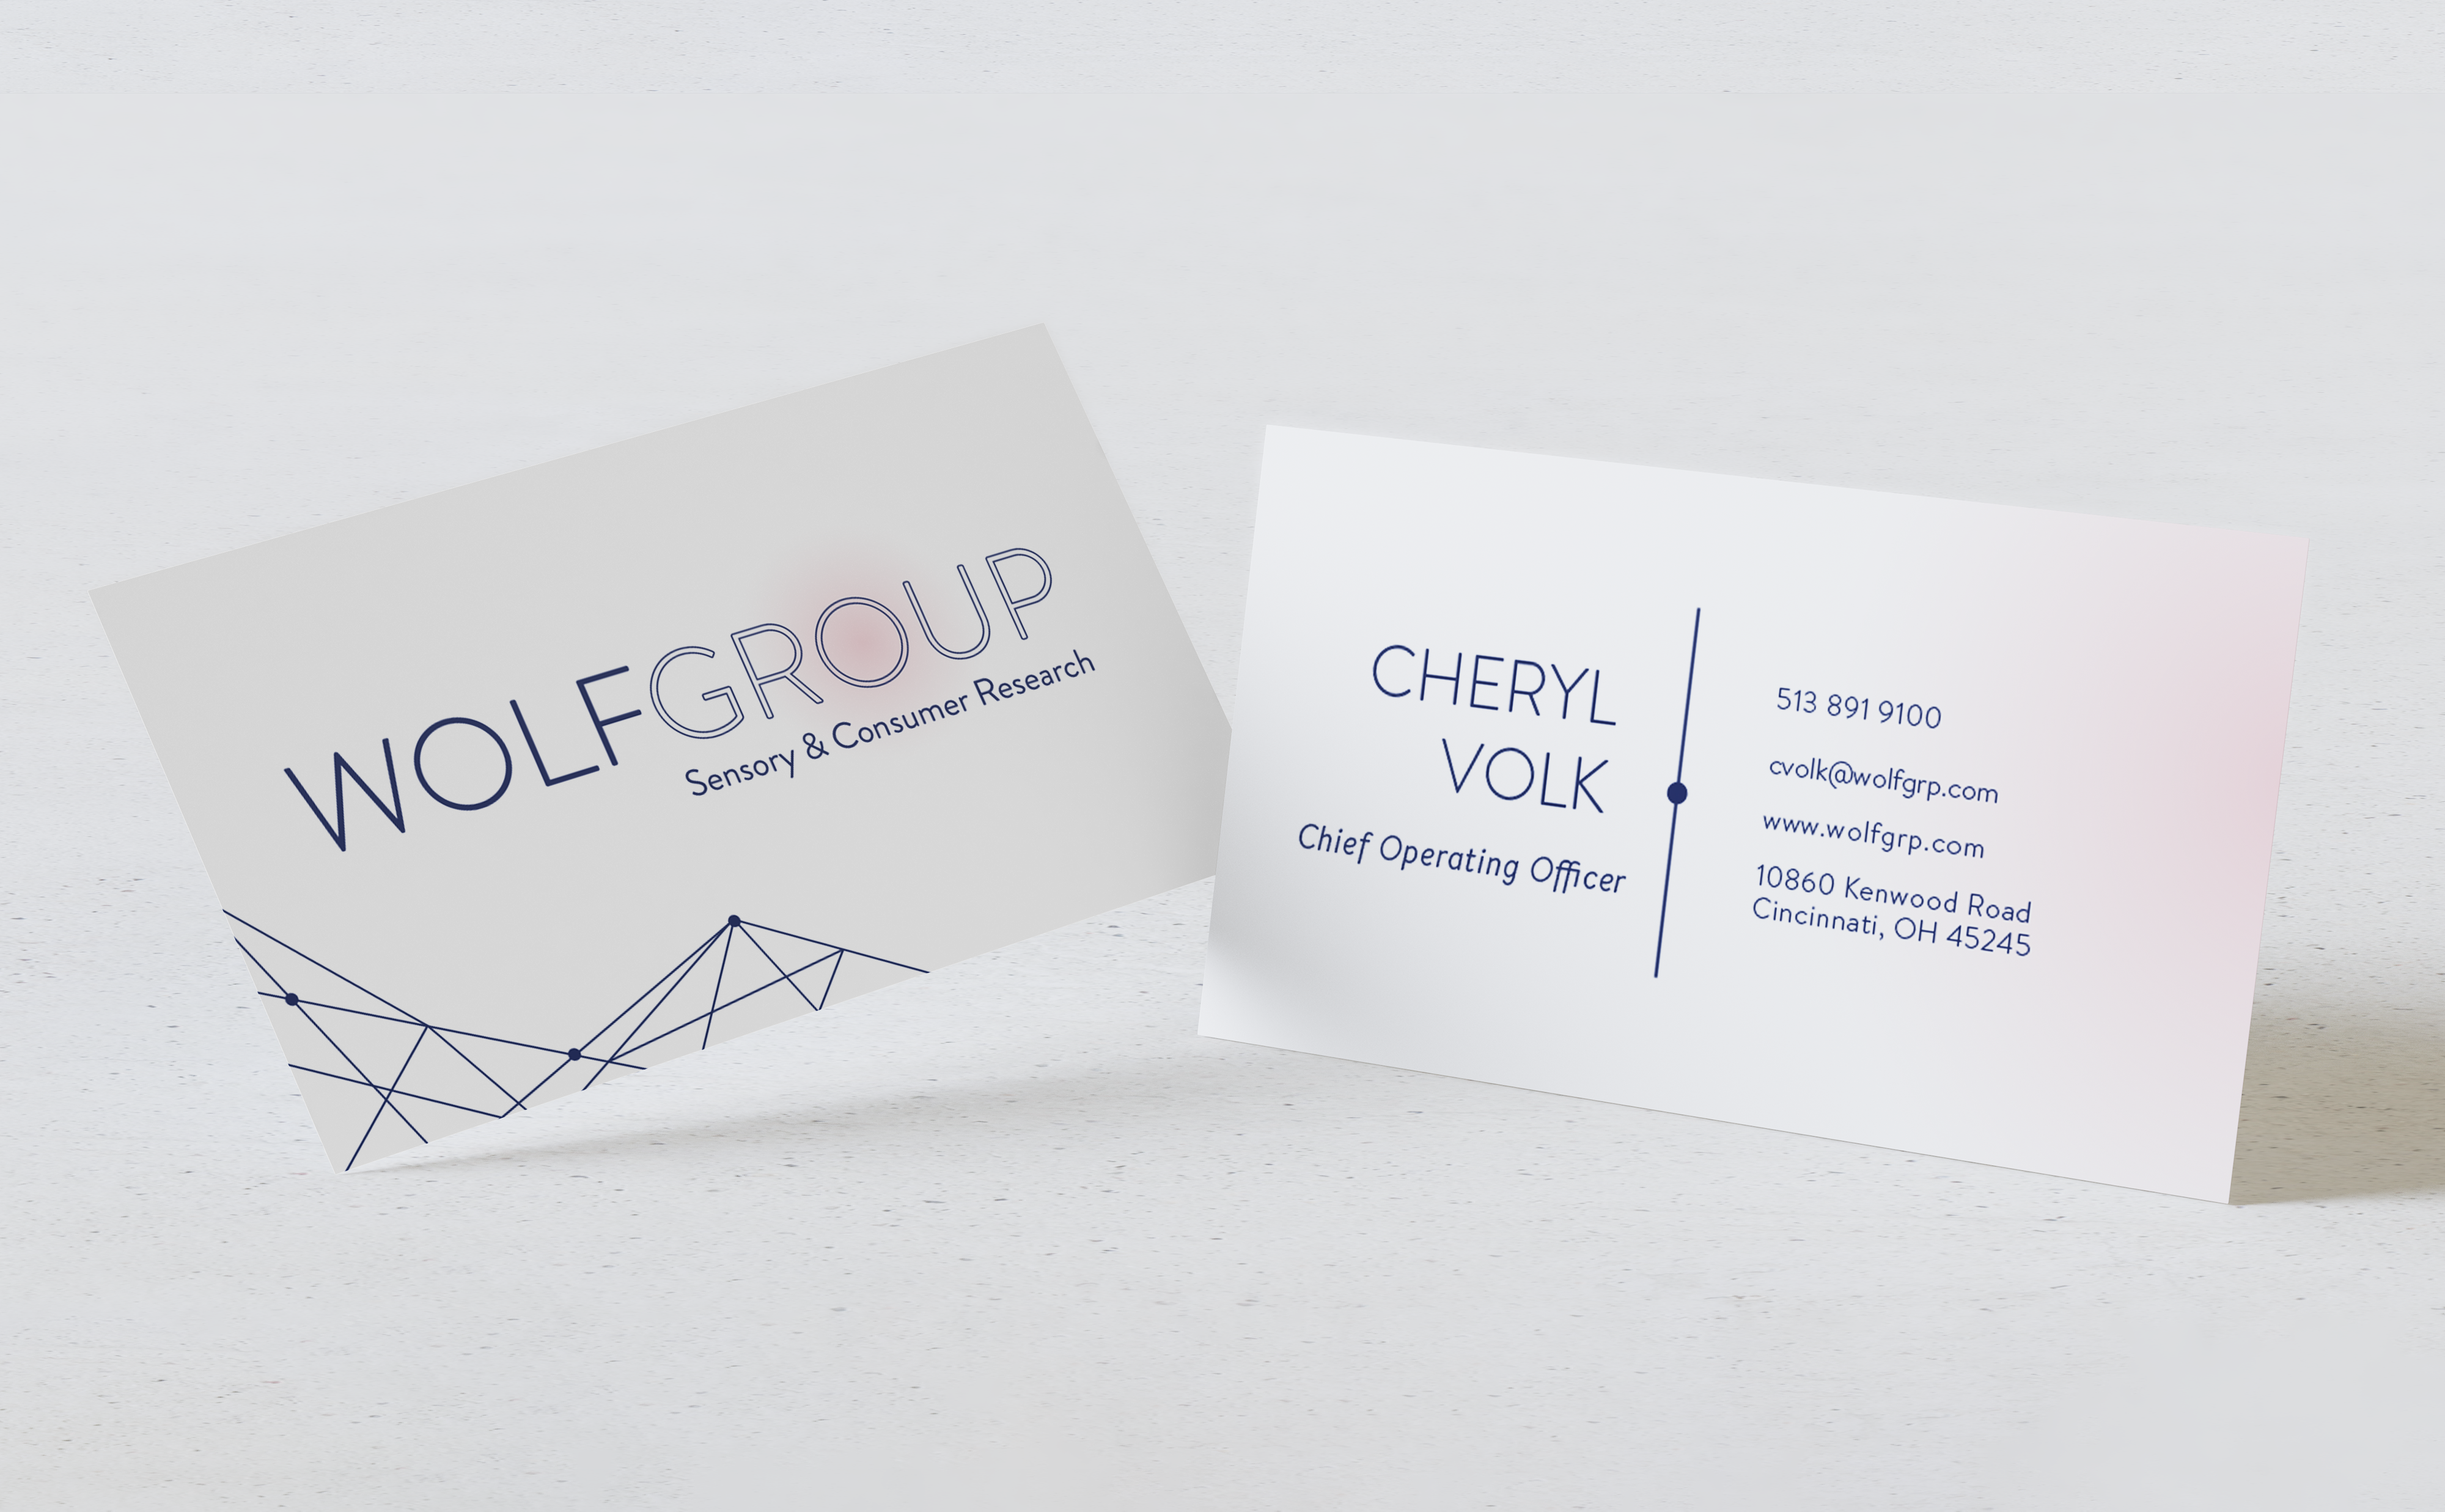 The font and back of the business card for Wolf Group.